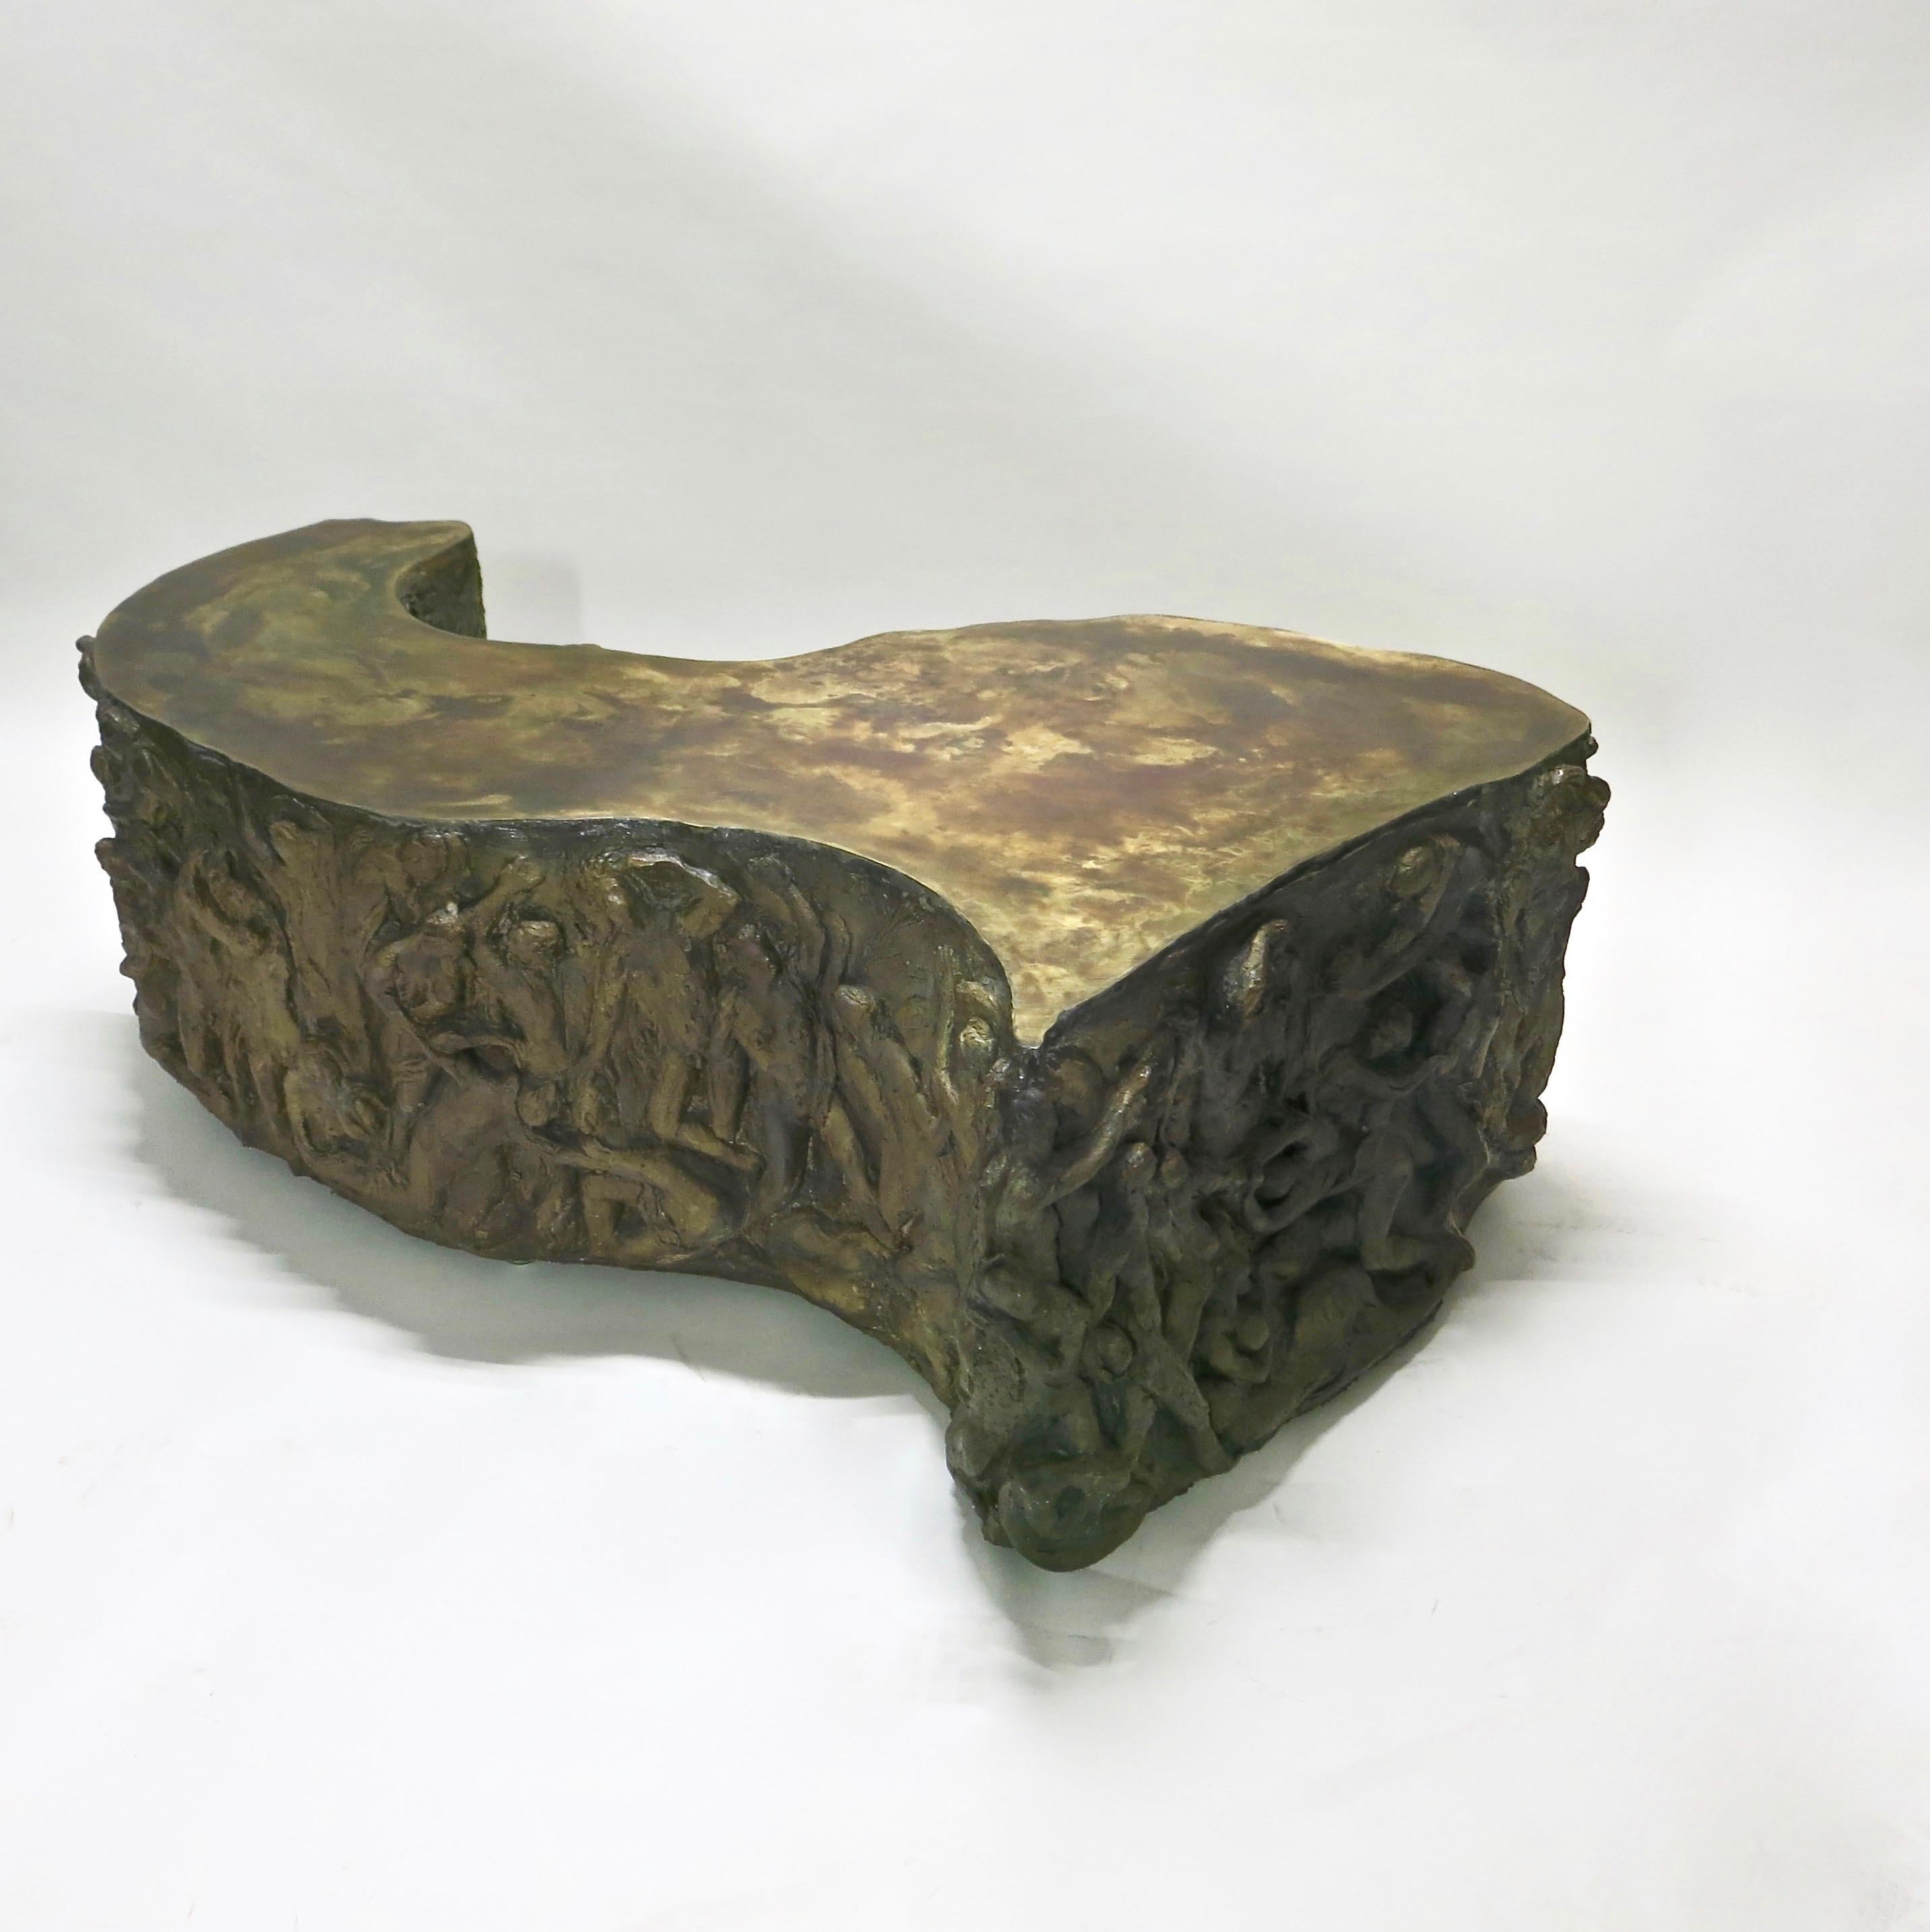 Sculpture and function meet in this one-off, studio made coffee table by Philip and Kelvin Laverne titled 